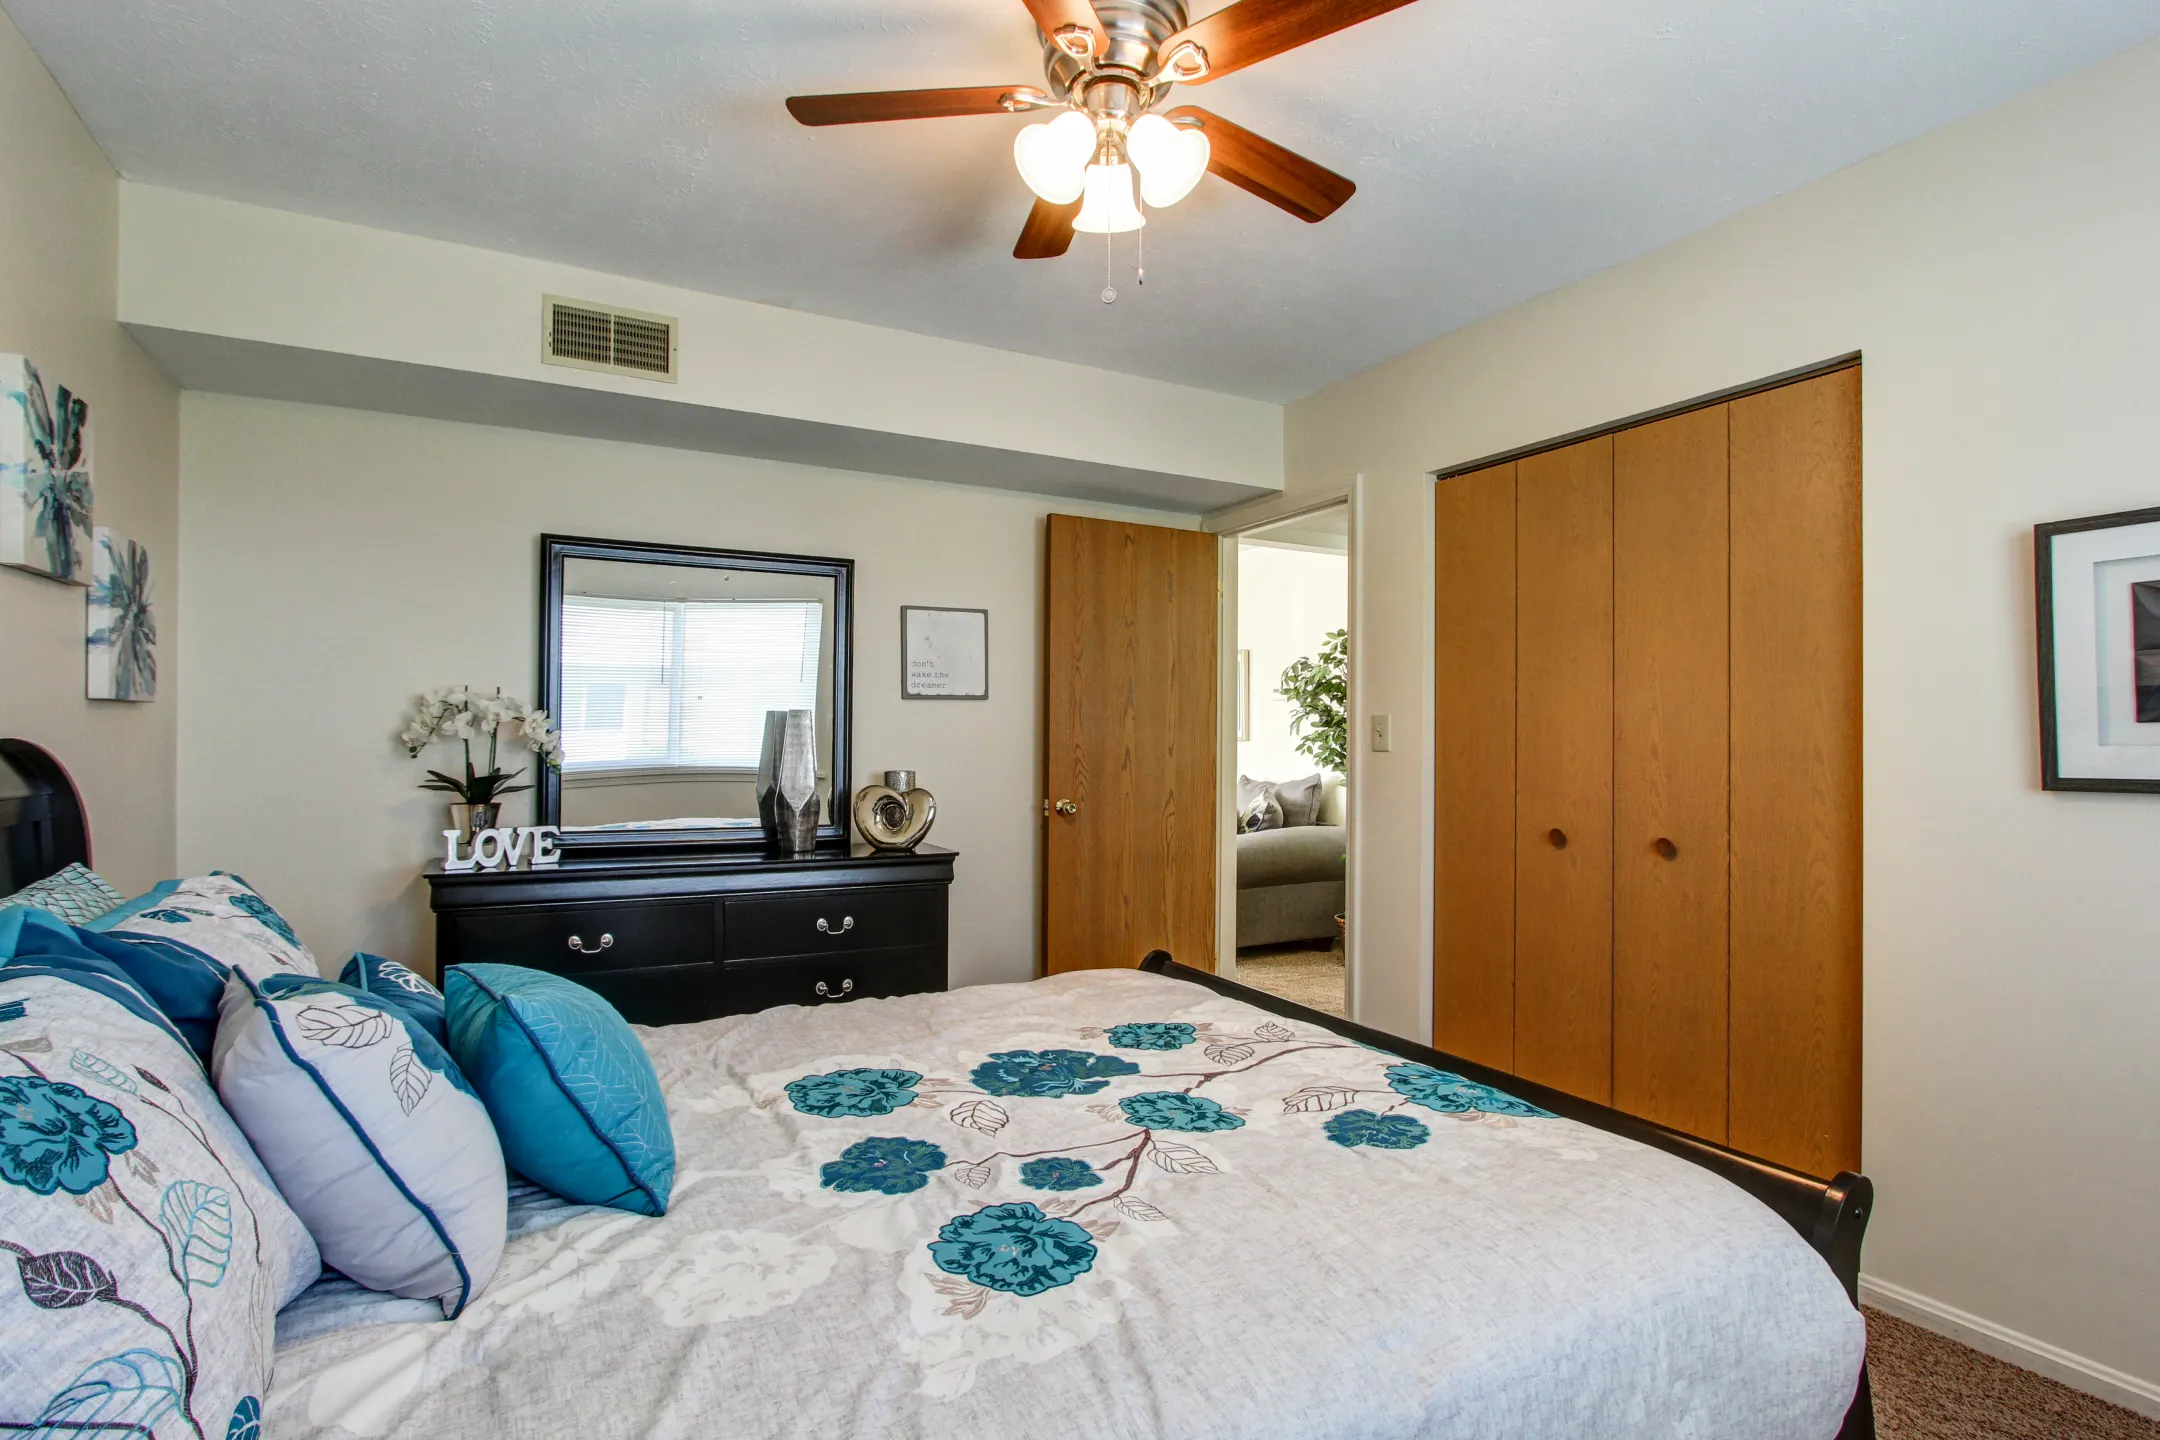 Bedroom - Cambridge Square Apartments - Youngstown, OH